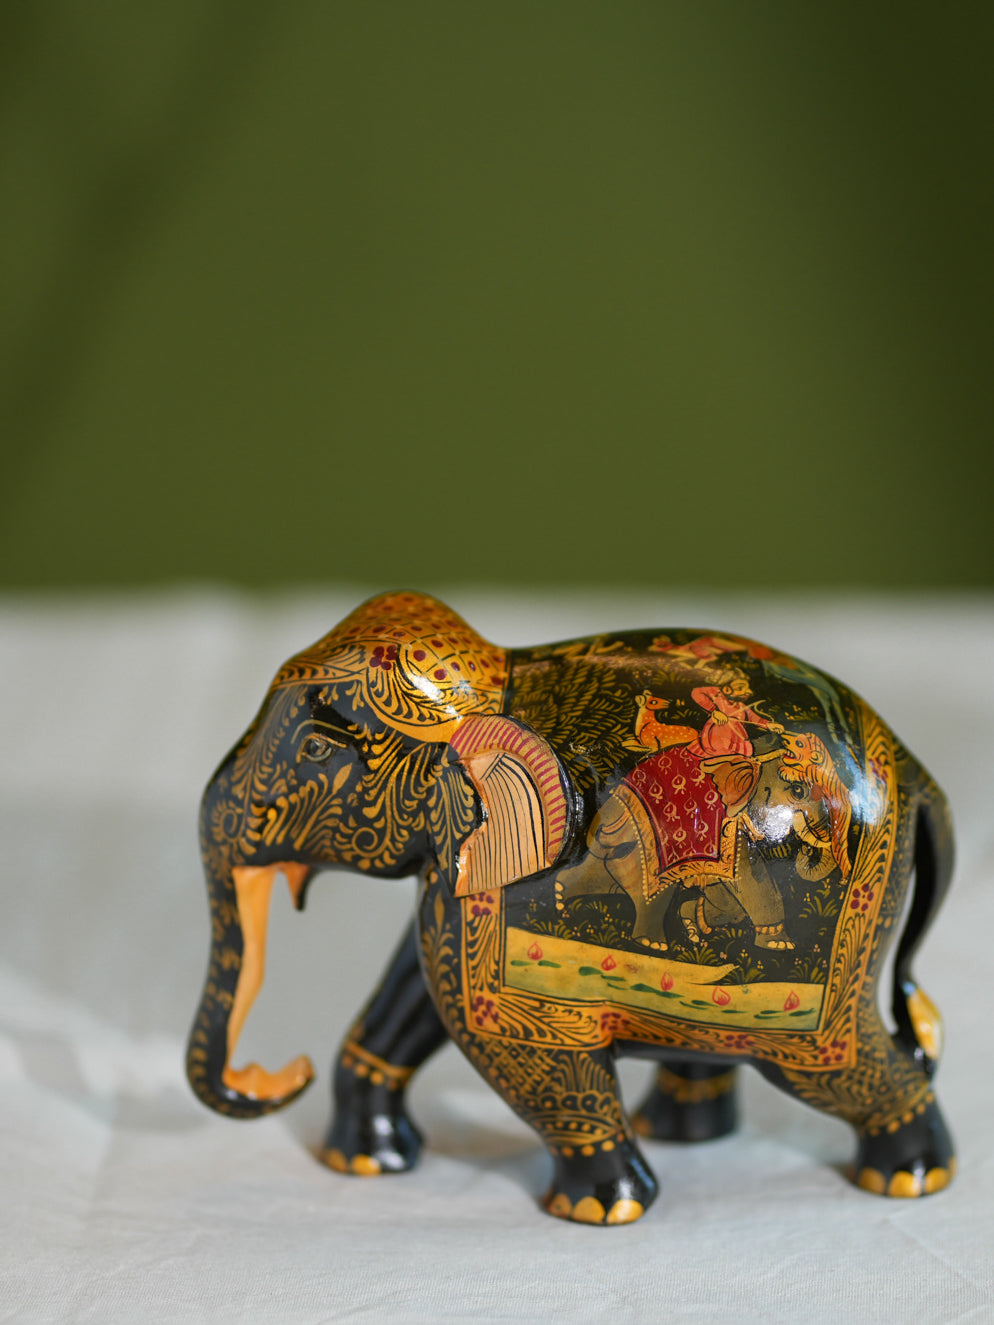 Load image into Gallery viewer, Miniature Art Wooden Curio - Elephant